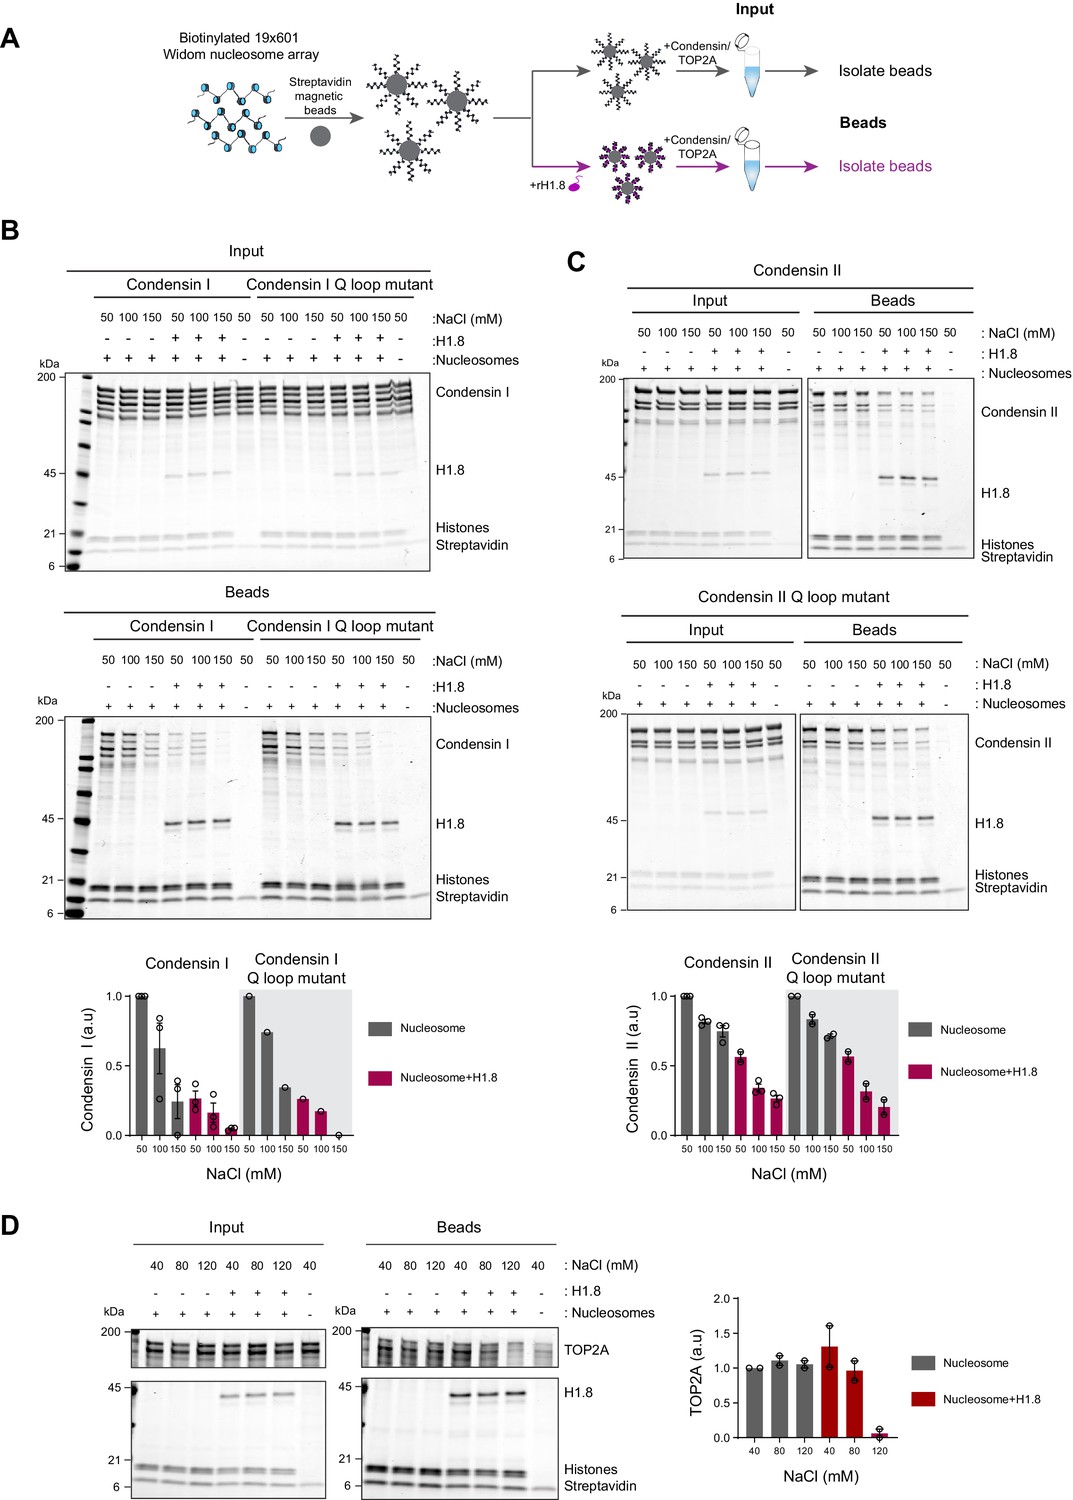 Linker histone H1.8 inhibits chromatin binding of condensins and DNA topoisomerase II to tune chromosome length and individualization eLife image